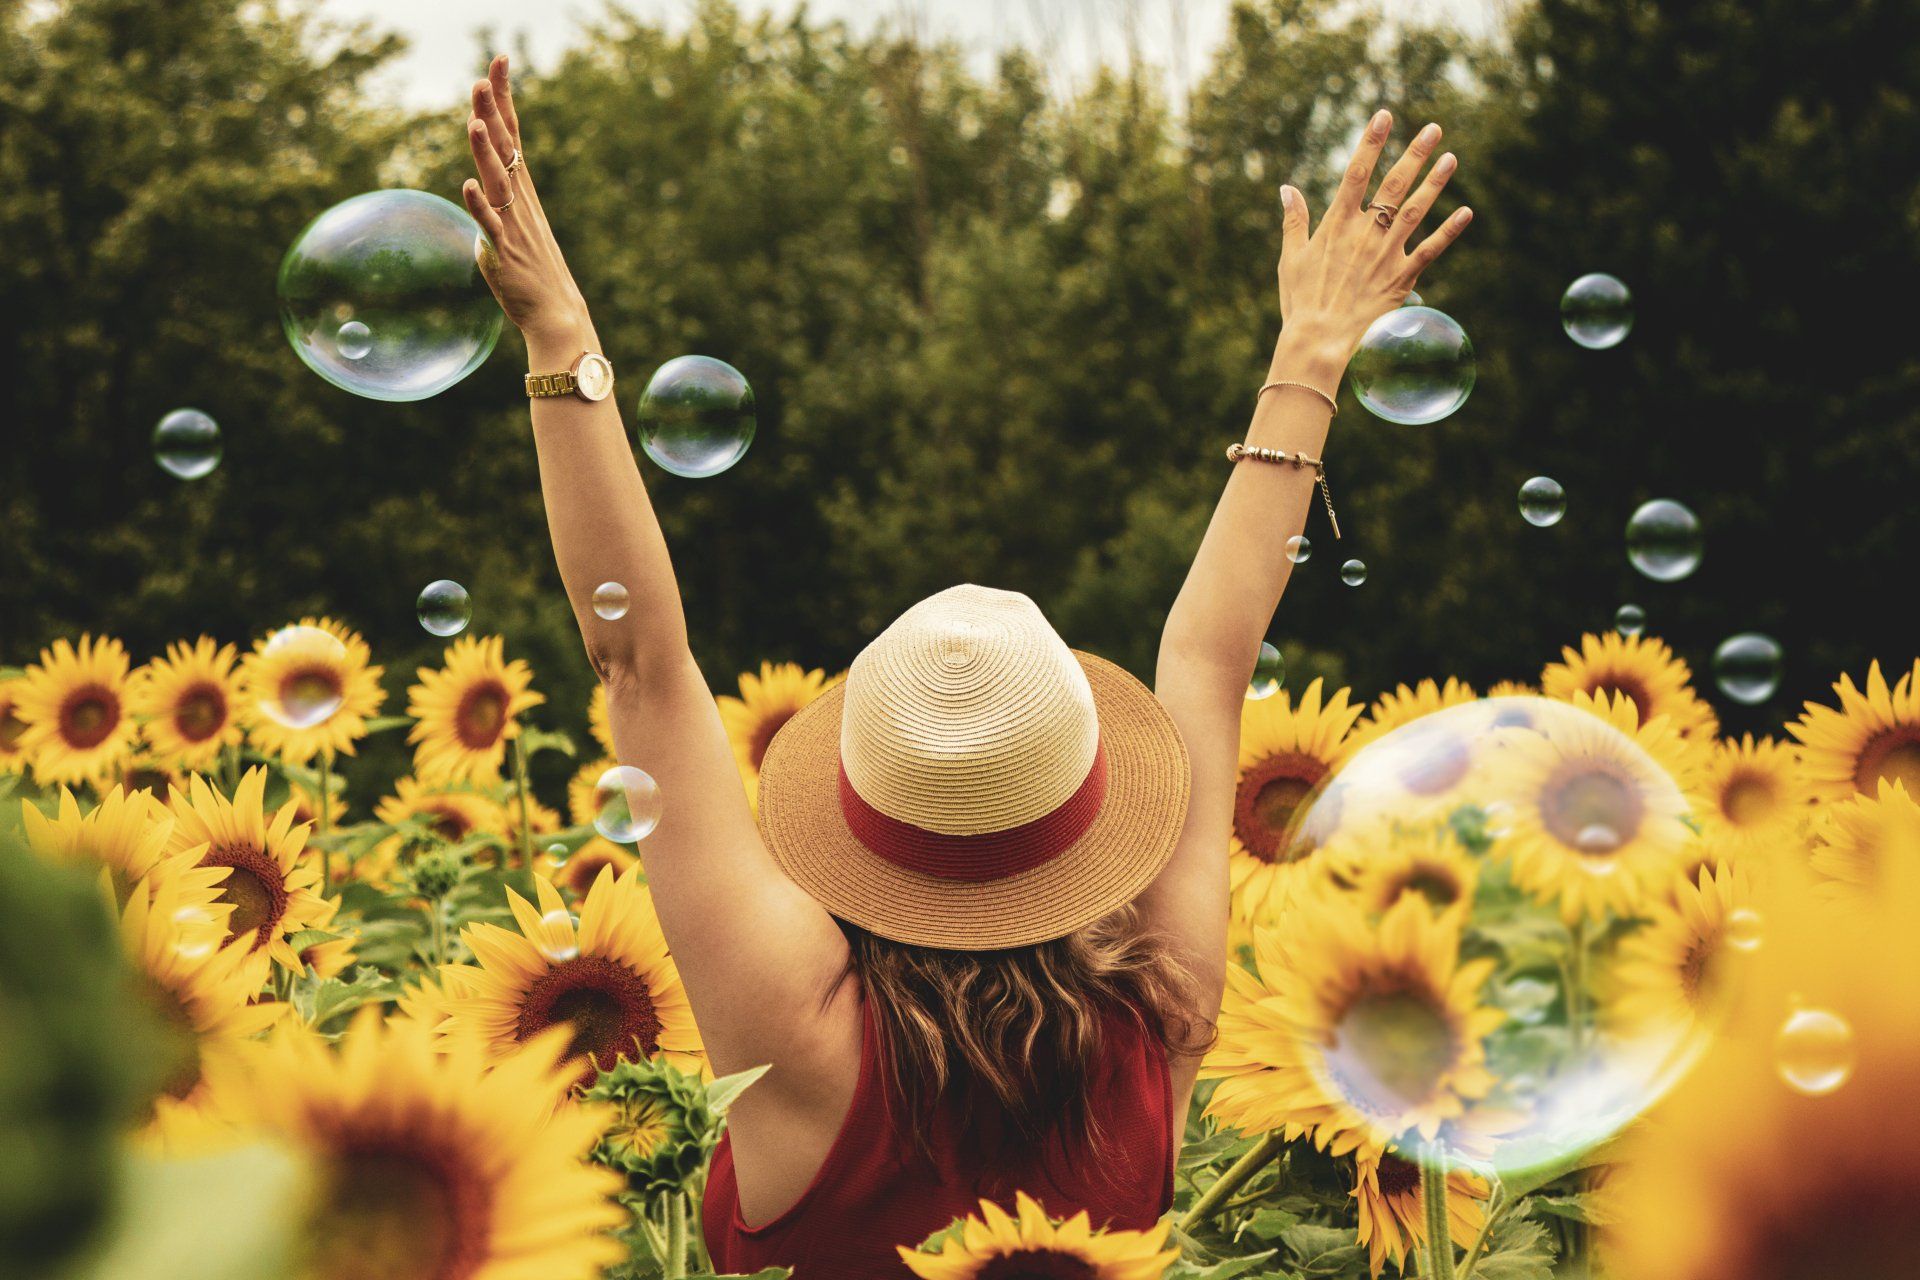 A woman is sitting in a field of sunflowers playing with soap bubbles.